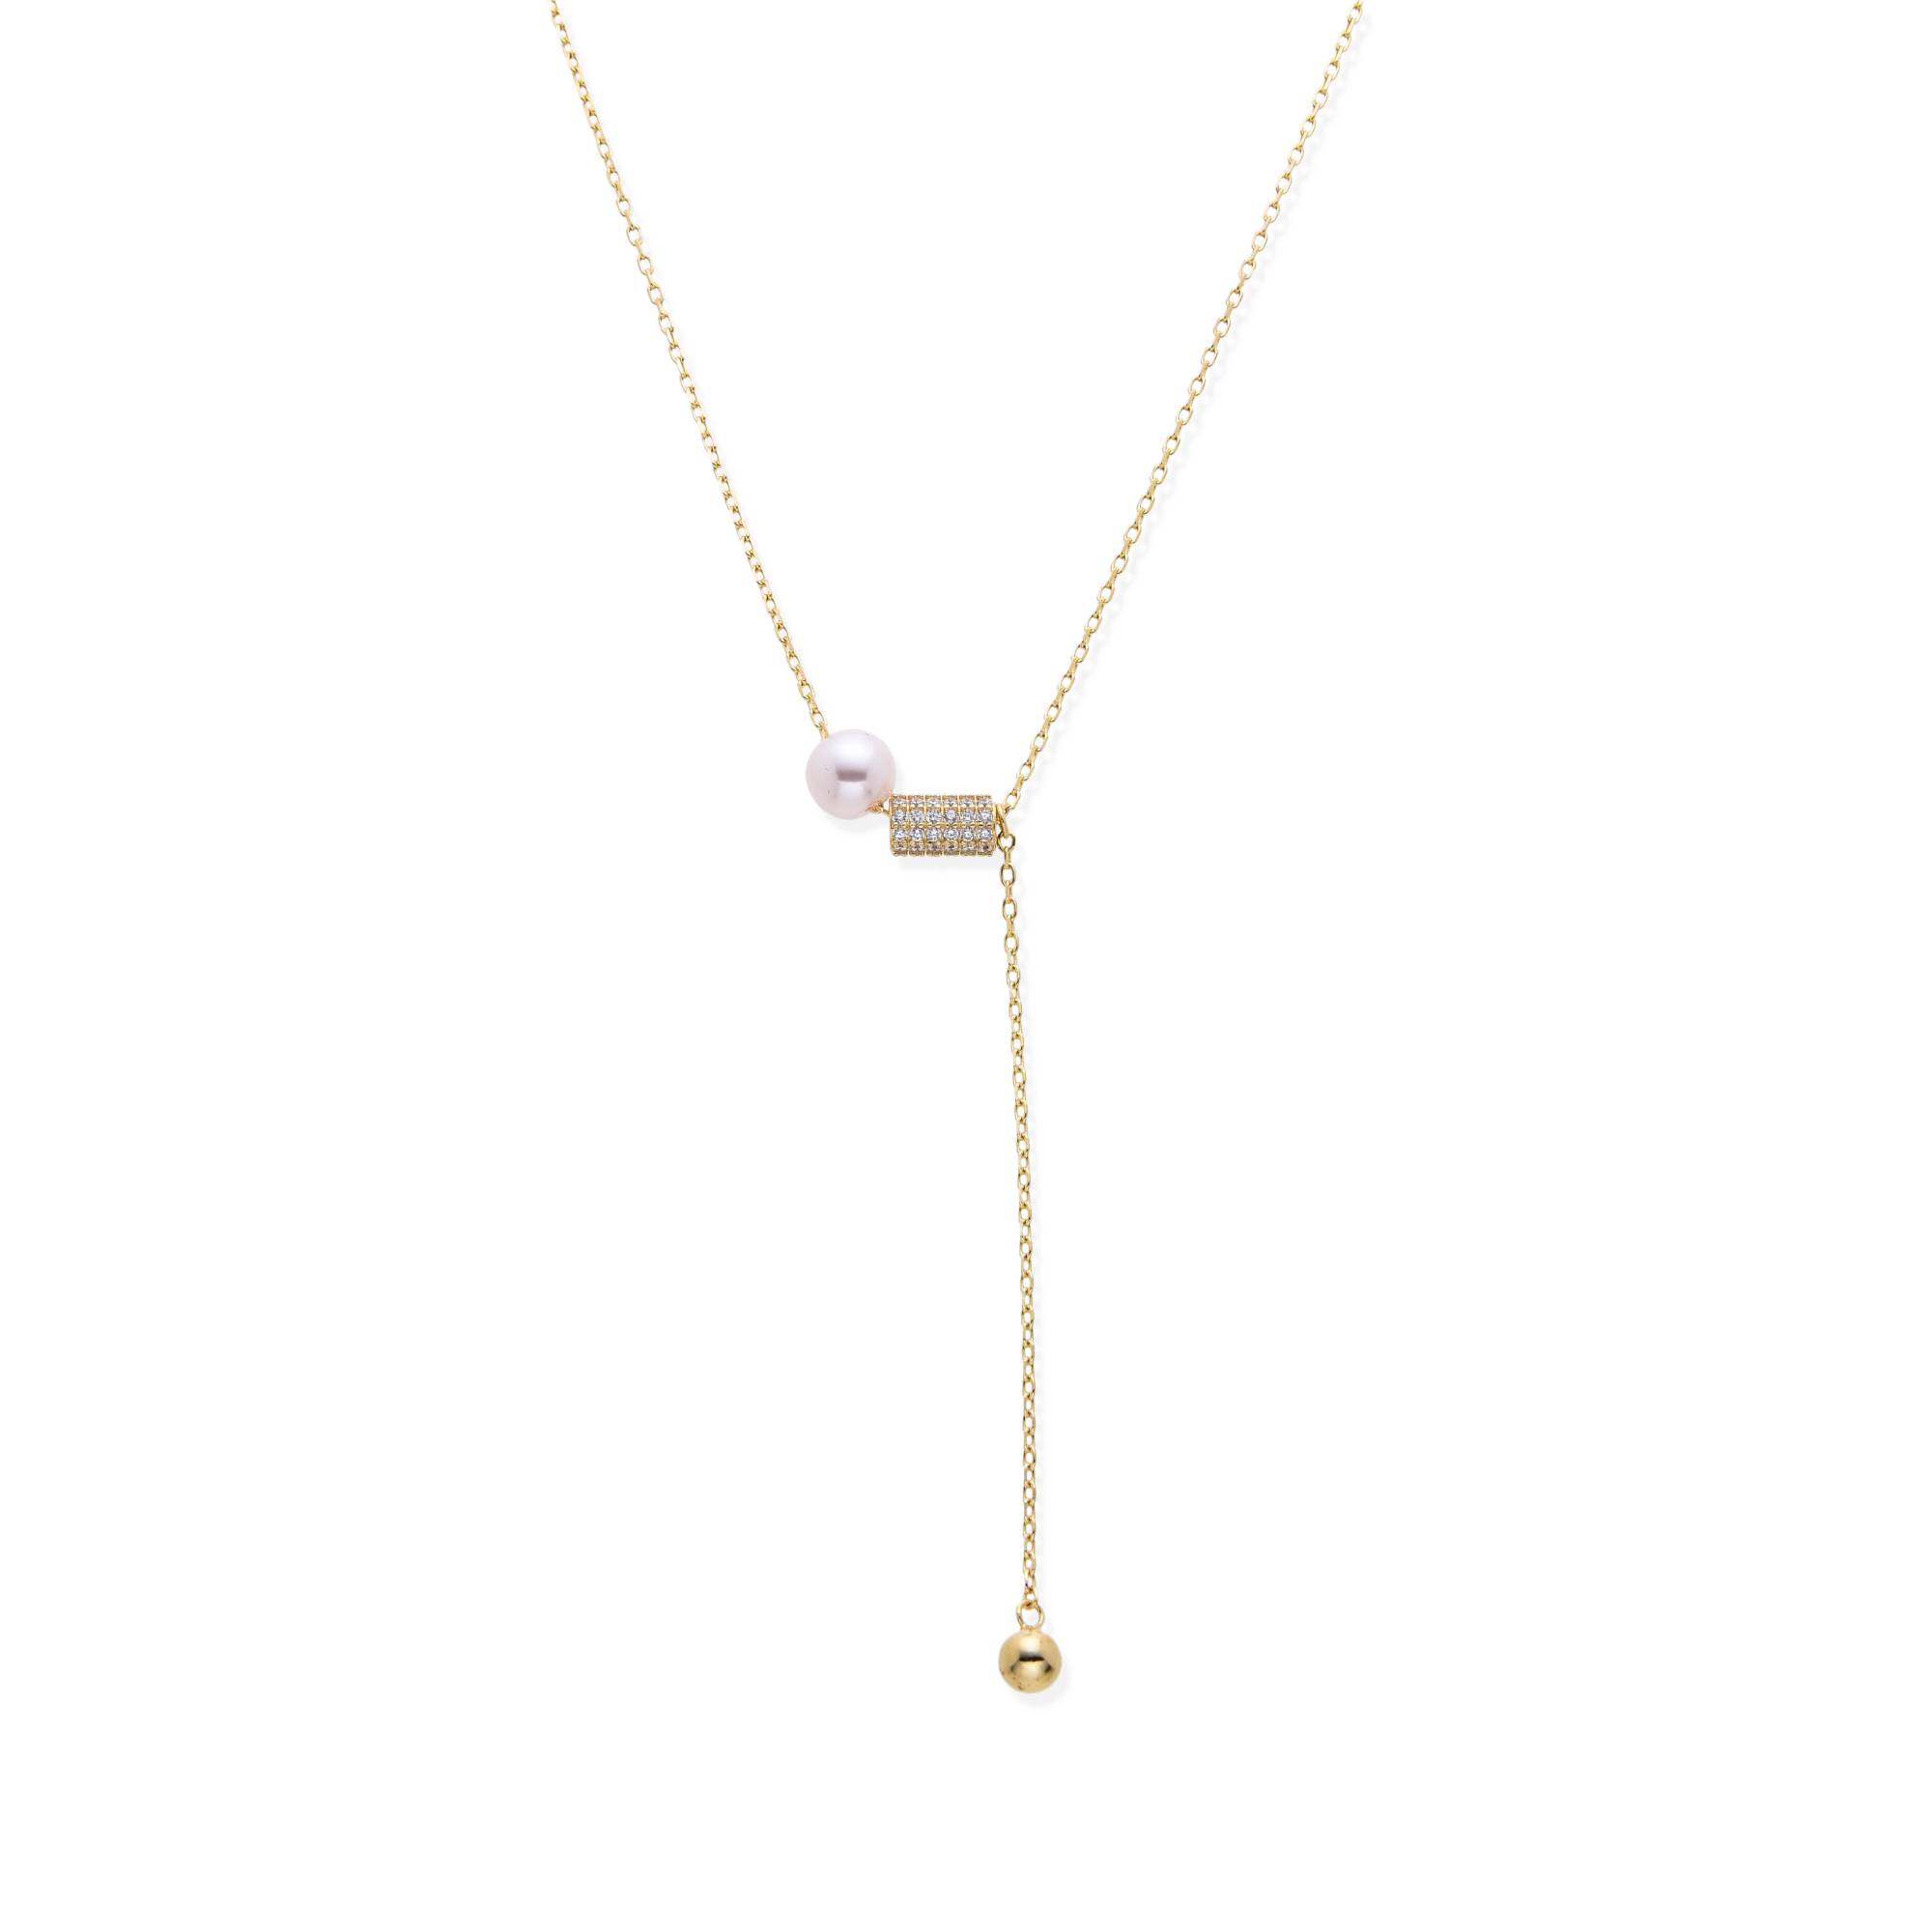 Vila Veloni Letter O Necklace, made of thread and natural stone